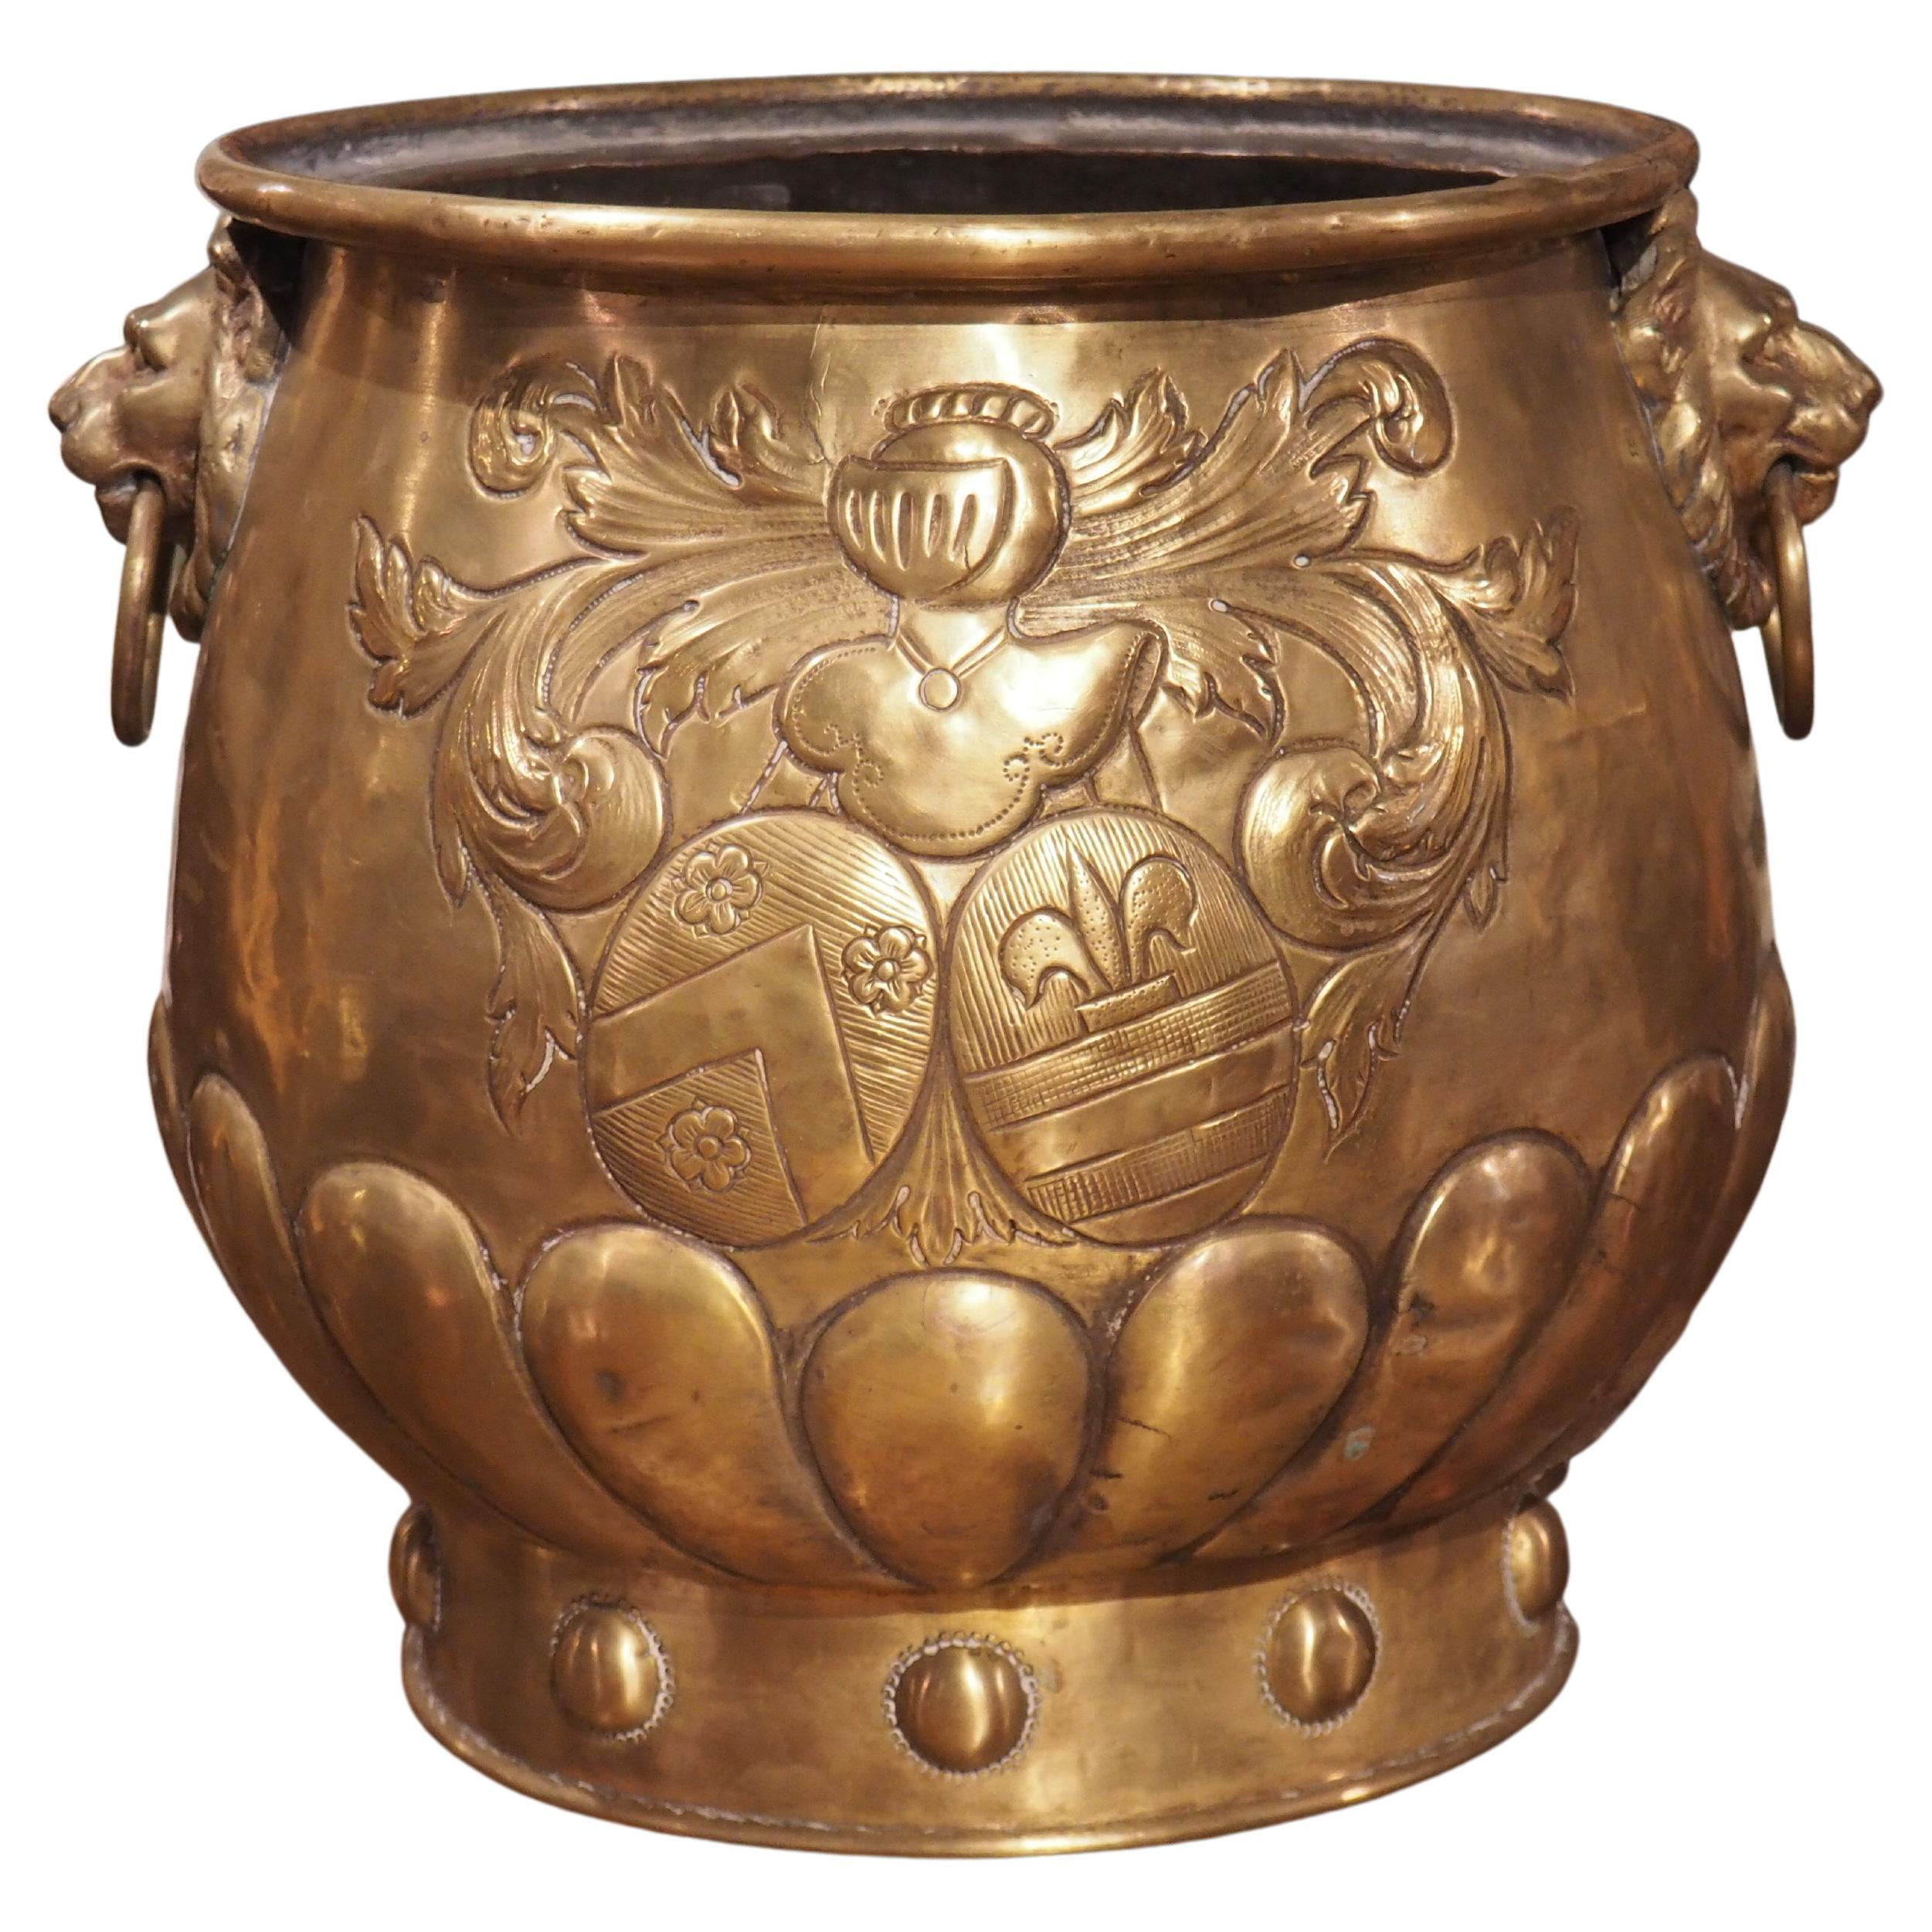 19th Century French Brass Repousse Cachepot with Coats of Arms and Lions